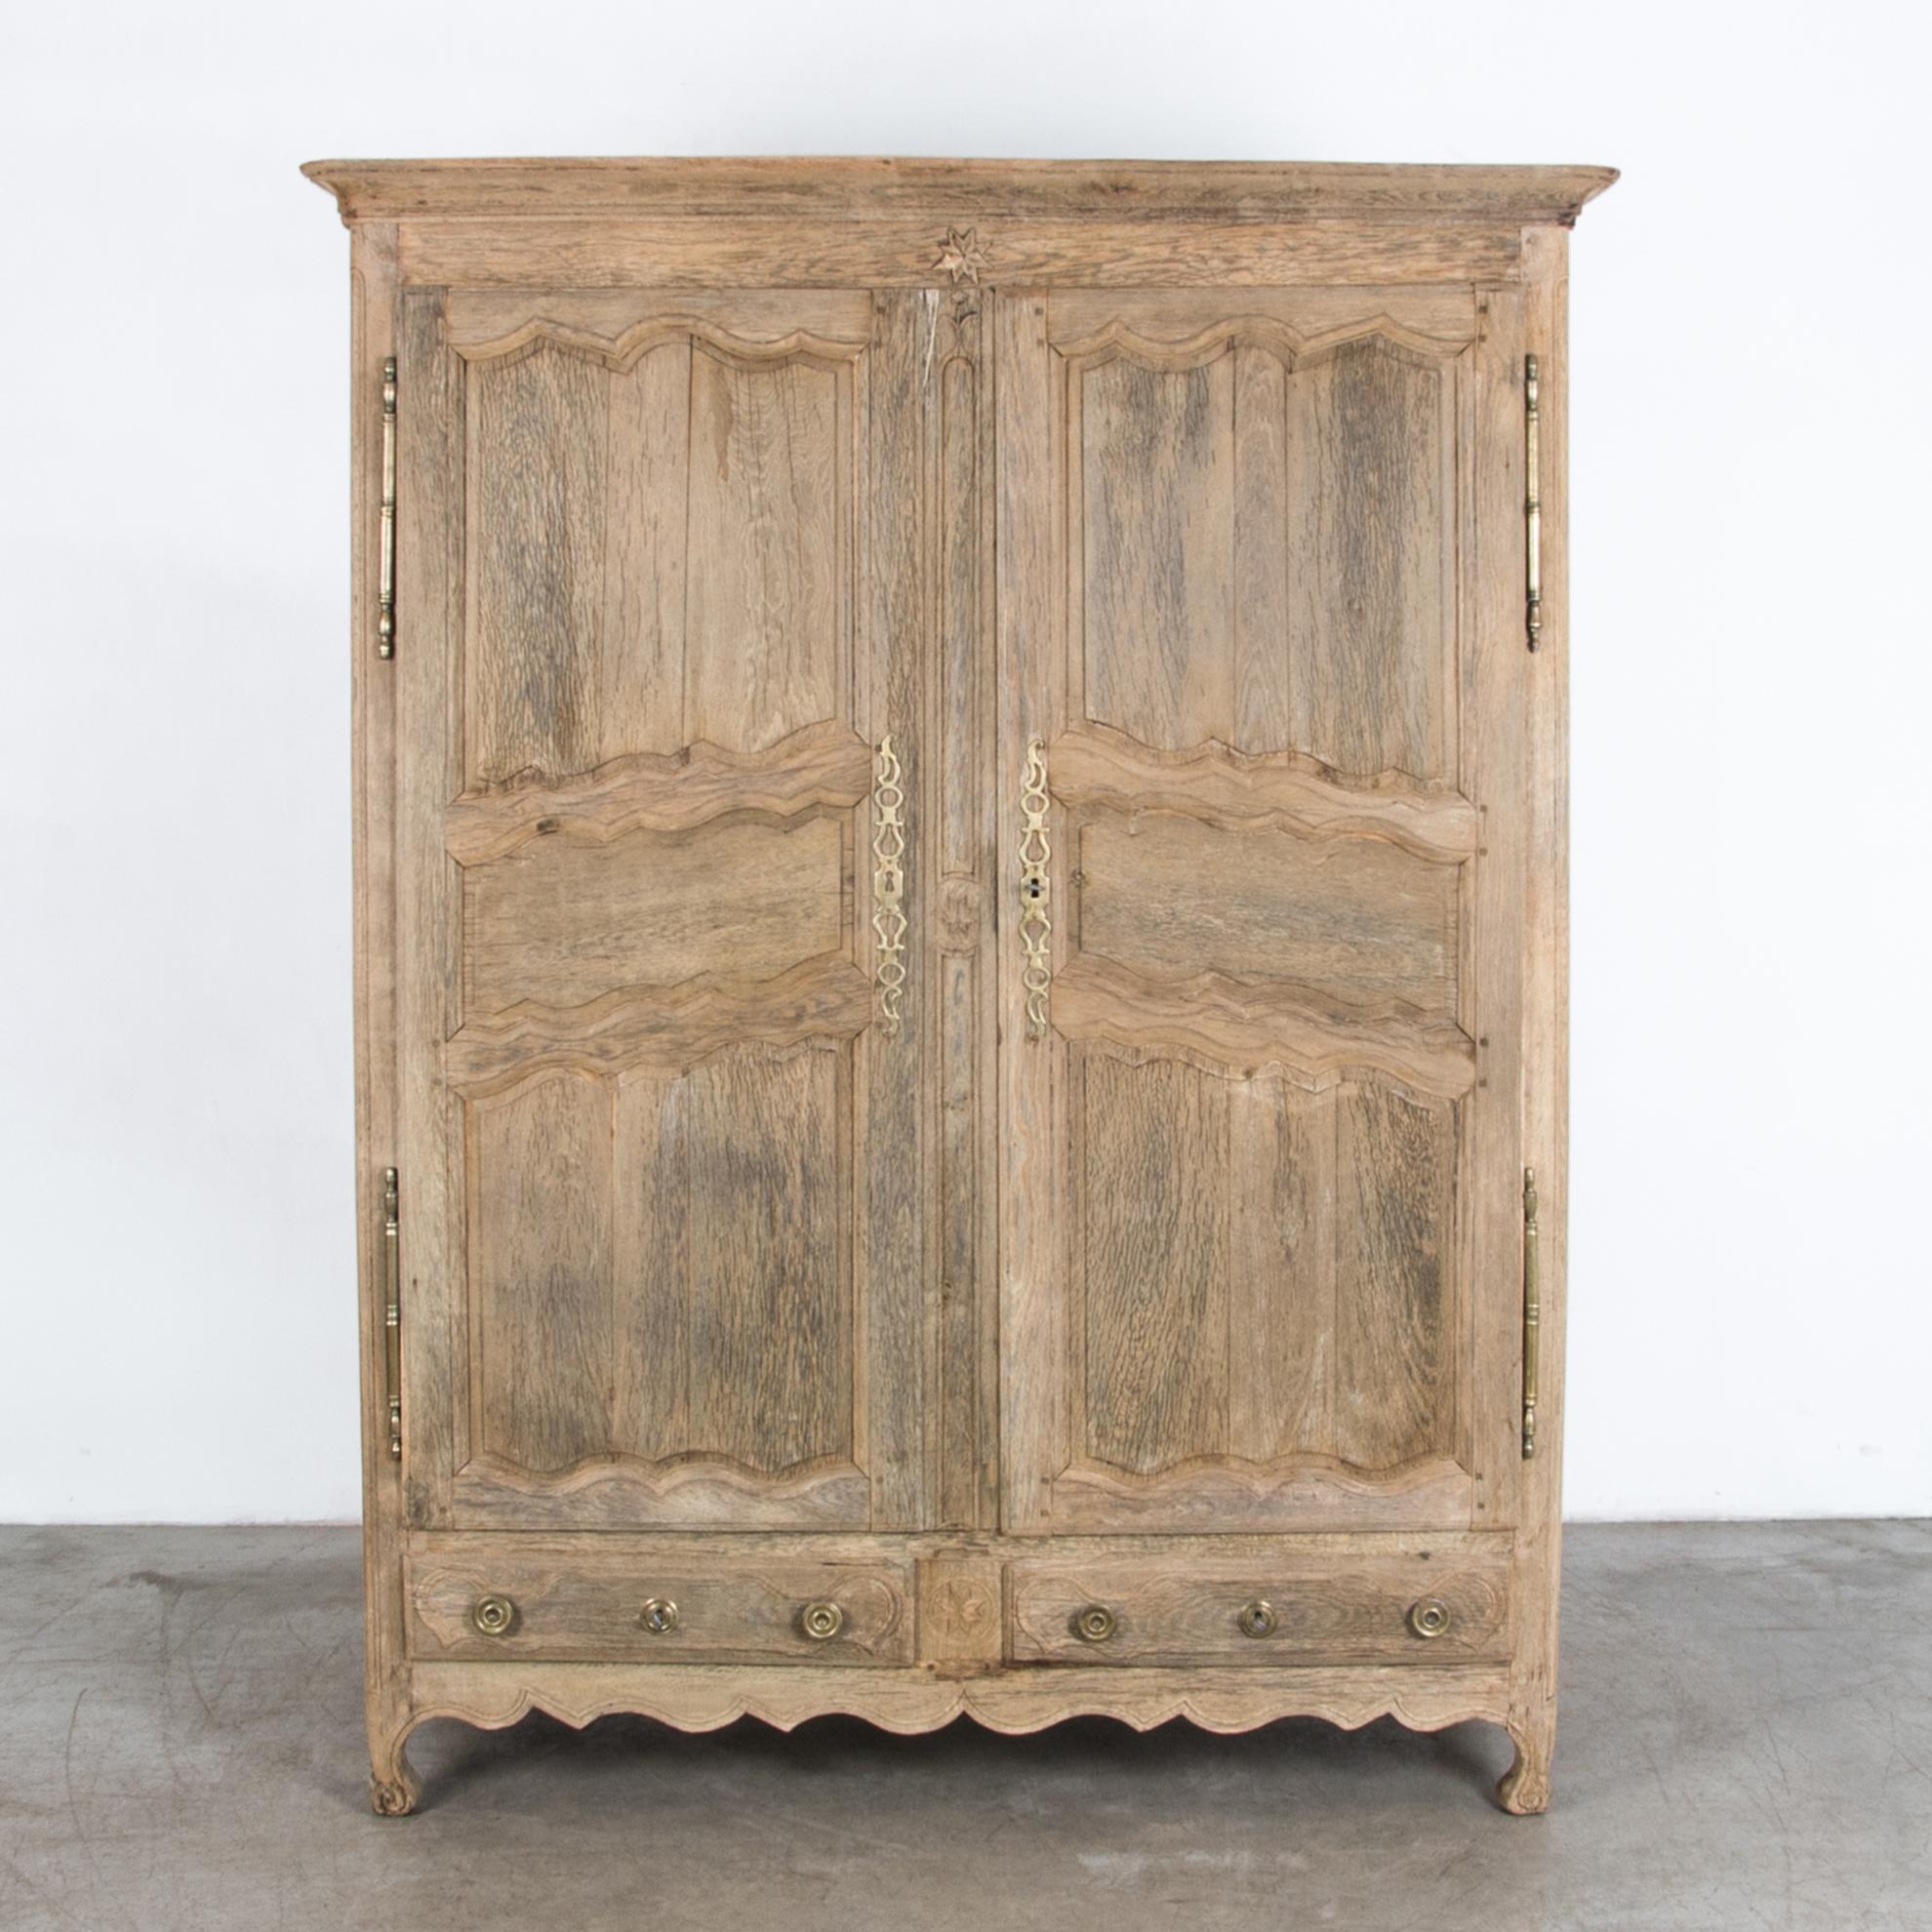 A French wardrobe from circa 1800 with distinctive cold growth oak in a rustic neutral finish. A spacious wide cabinet for wardrobe, pantry or other large storage with practical lower drawers. Time tested traditional craftsmanship, with original